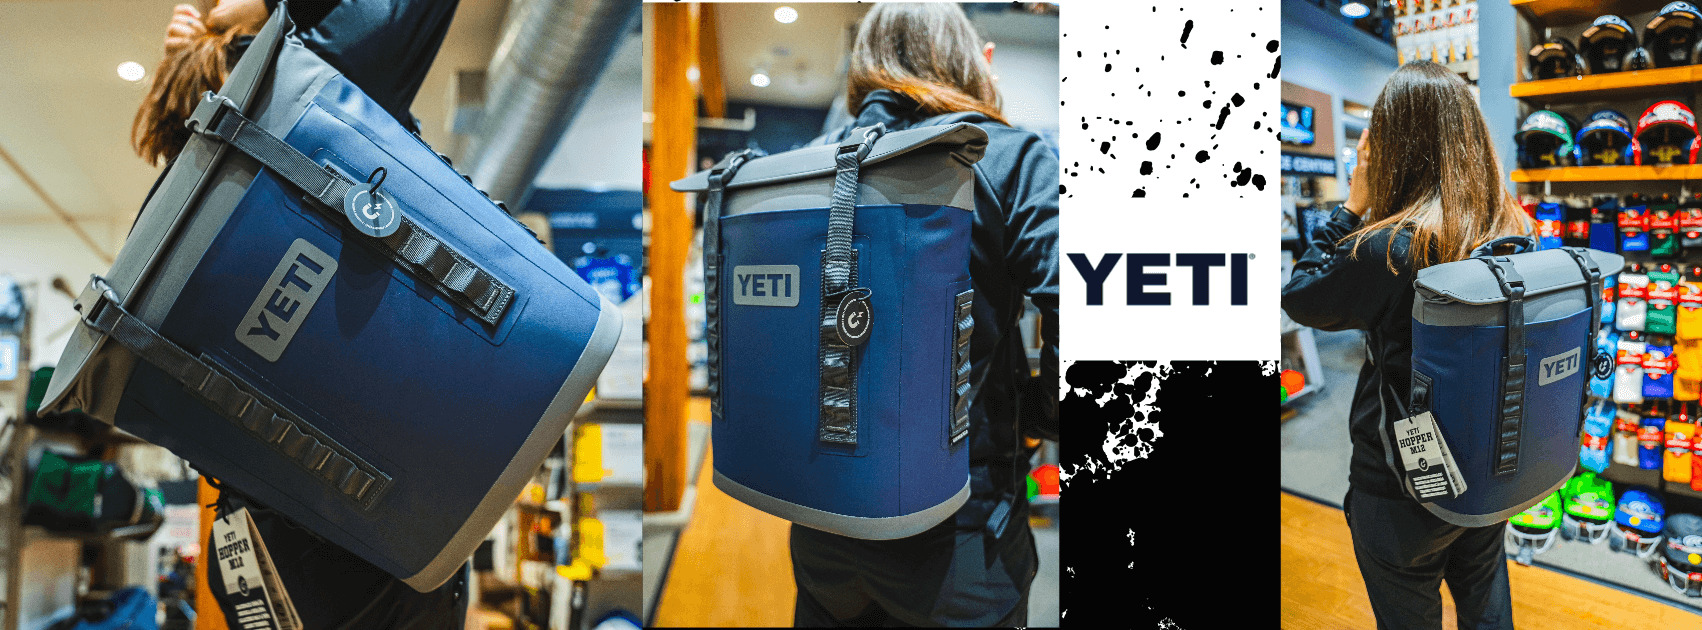 NEW YETI M12 Soft Cooler Backpack